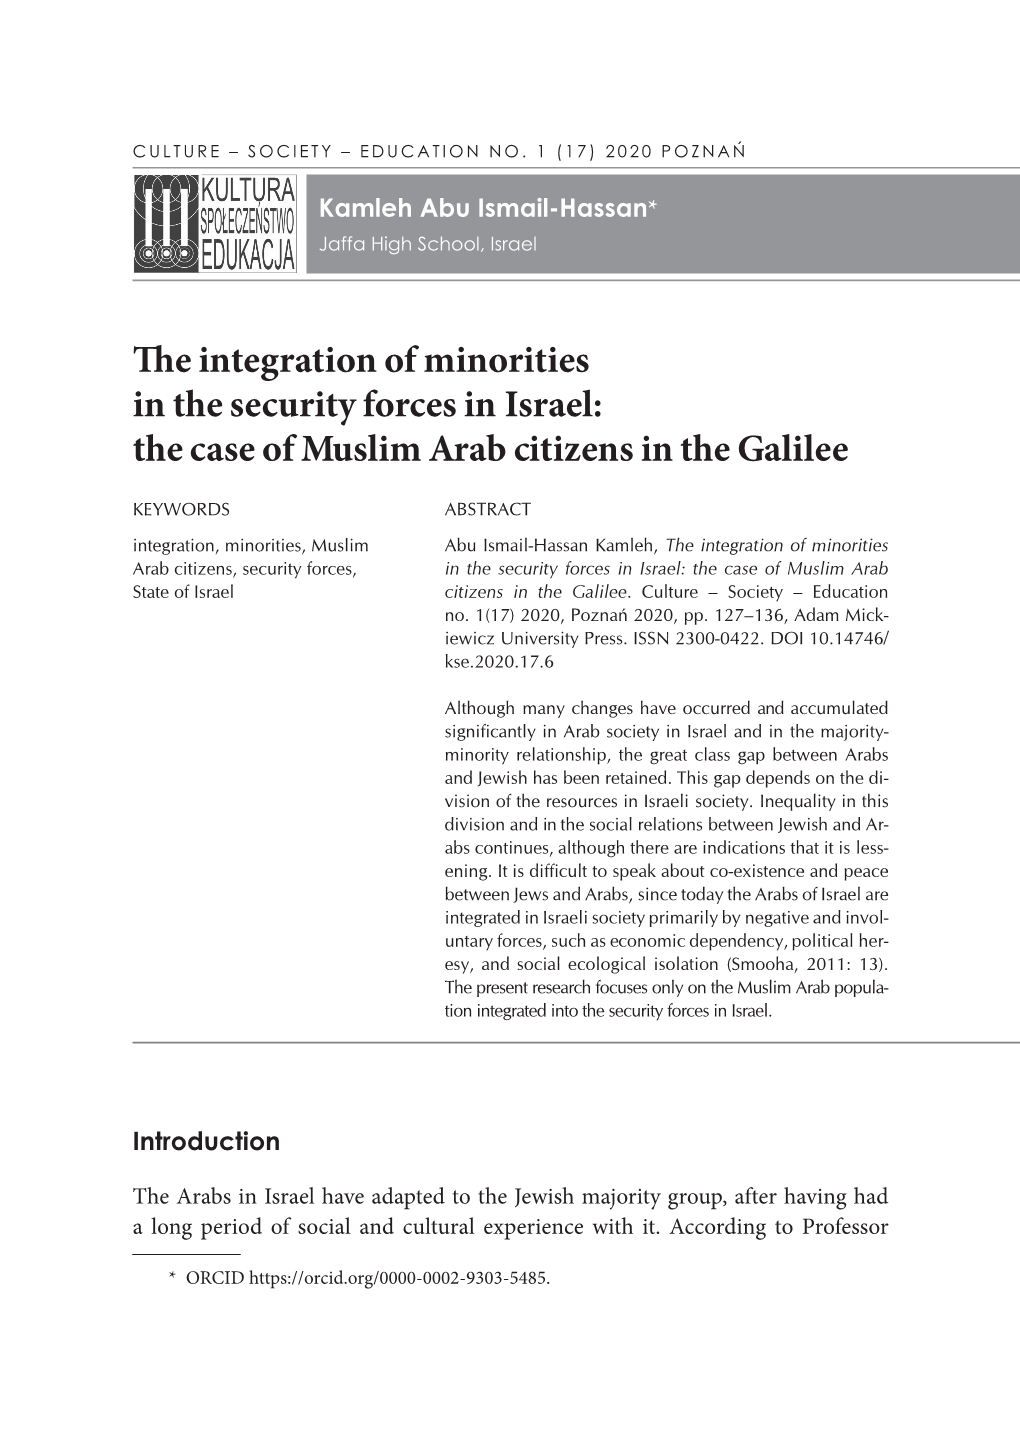 The Integration of Minorities in the Security Forces in Israel: the Case of Muslim Arab Citizens in the Galilee1